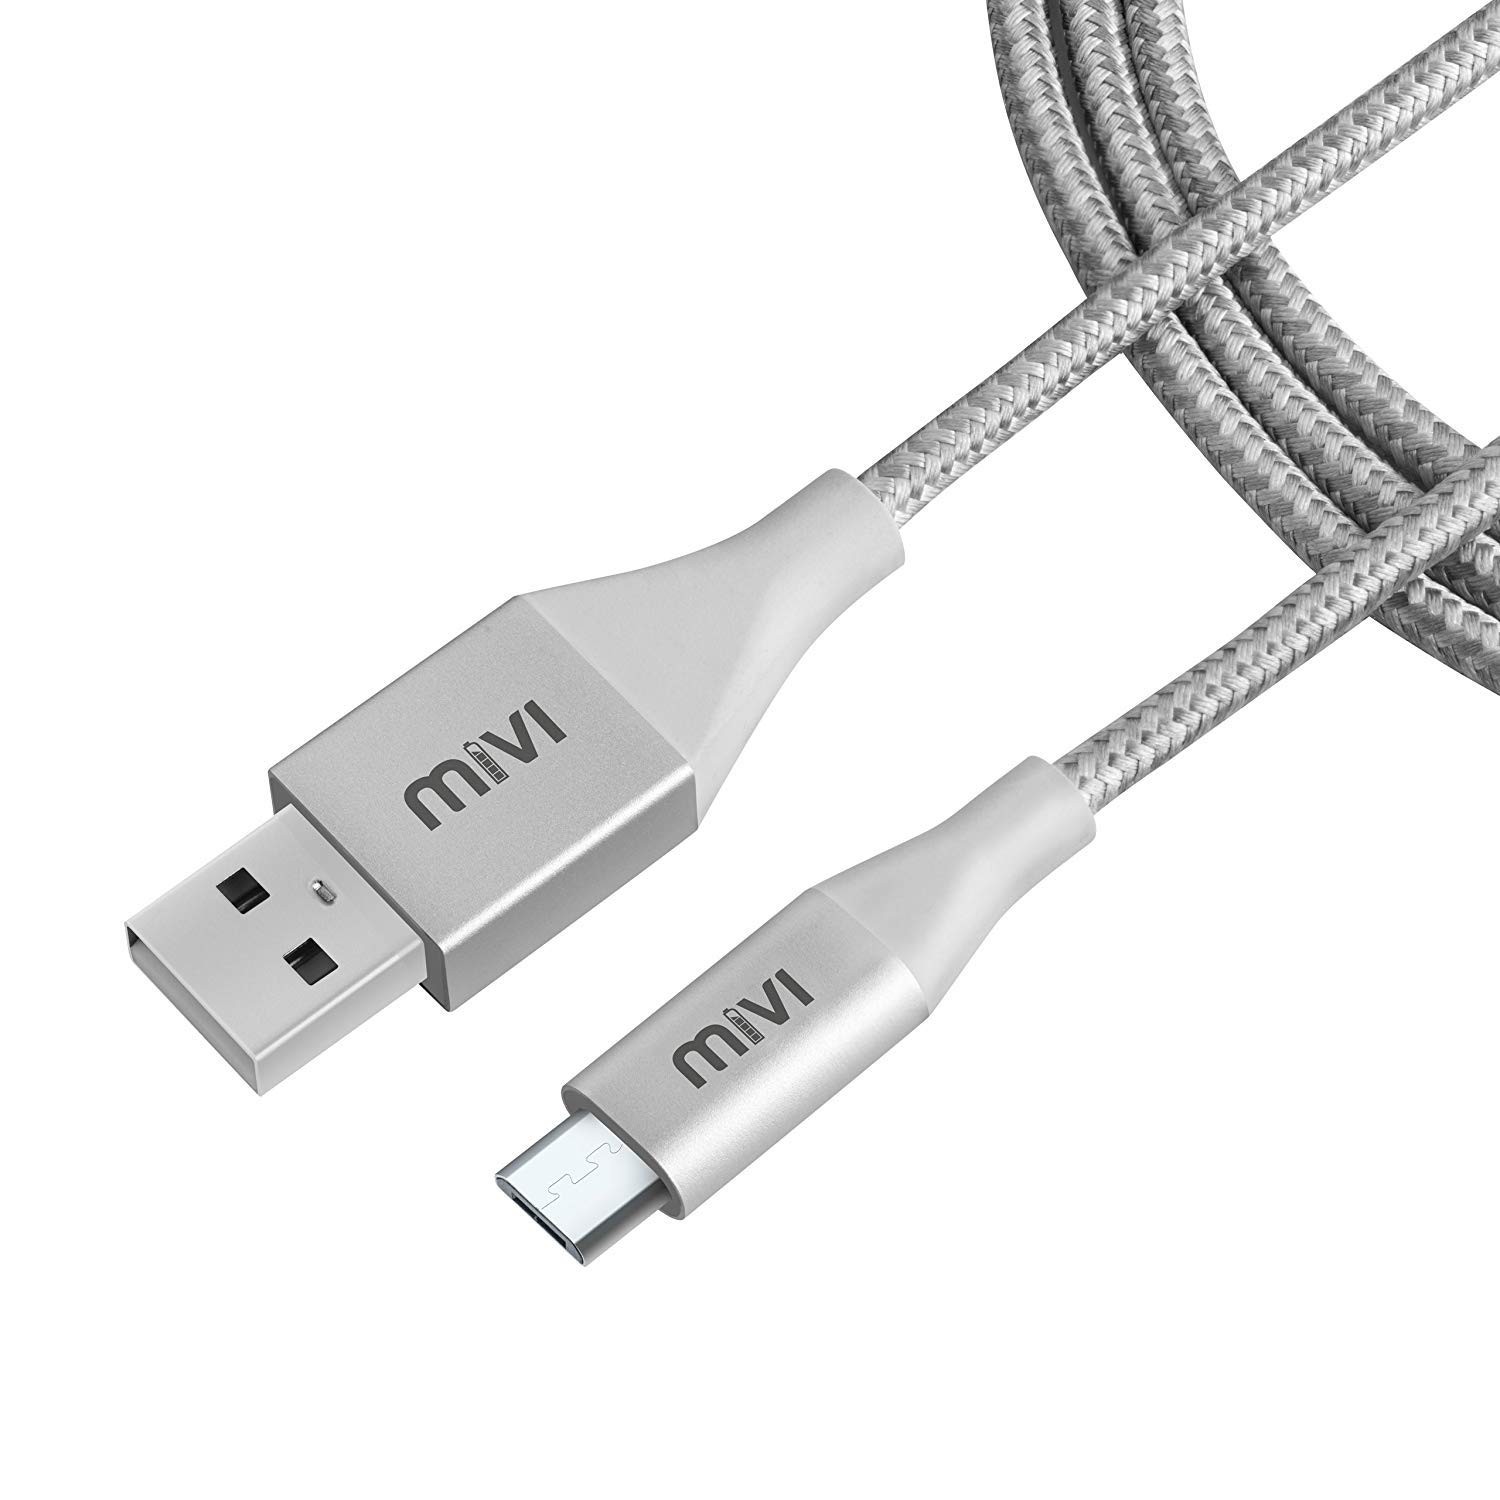 SAVE UP TO 45% OFF ON- Micro USB 6 Feet Cable with Khali Tough Bullet Proof Material